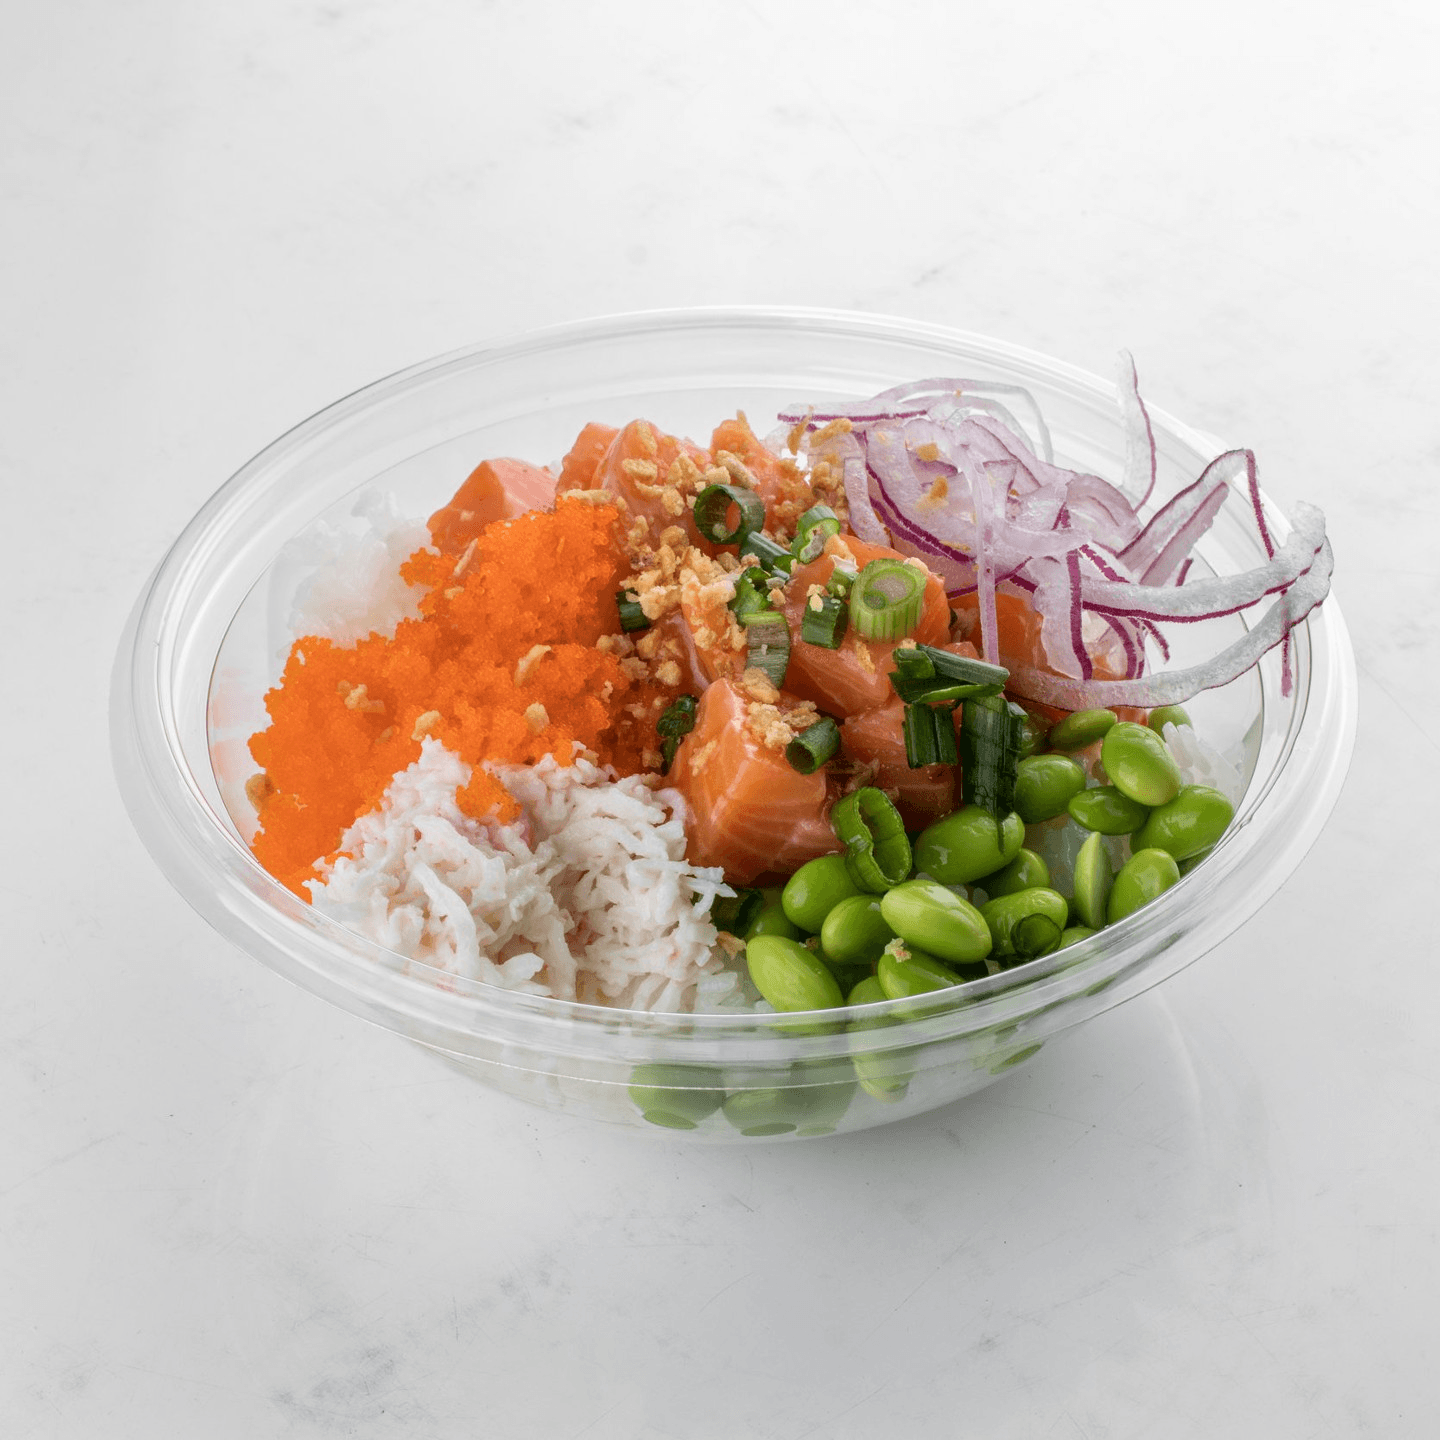 Dive into the Salmon Lover Bowl